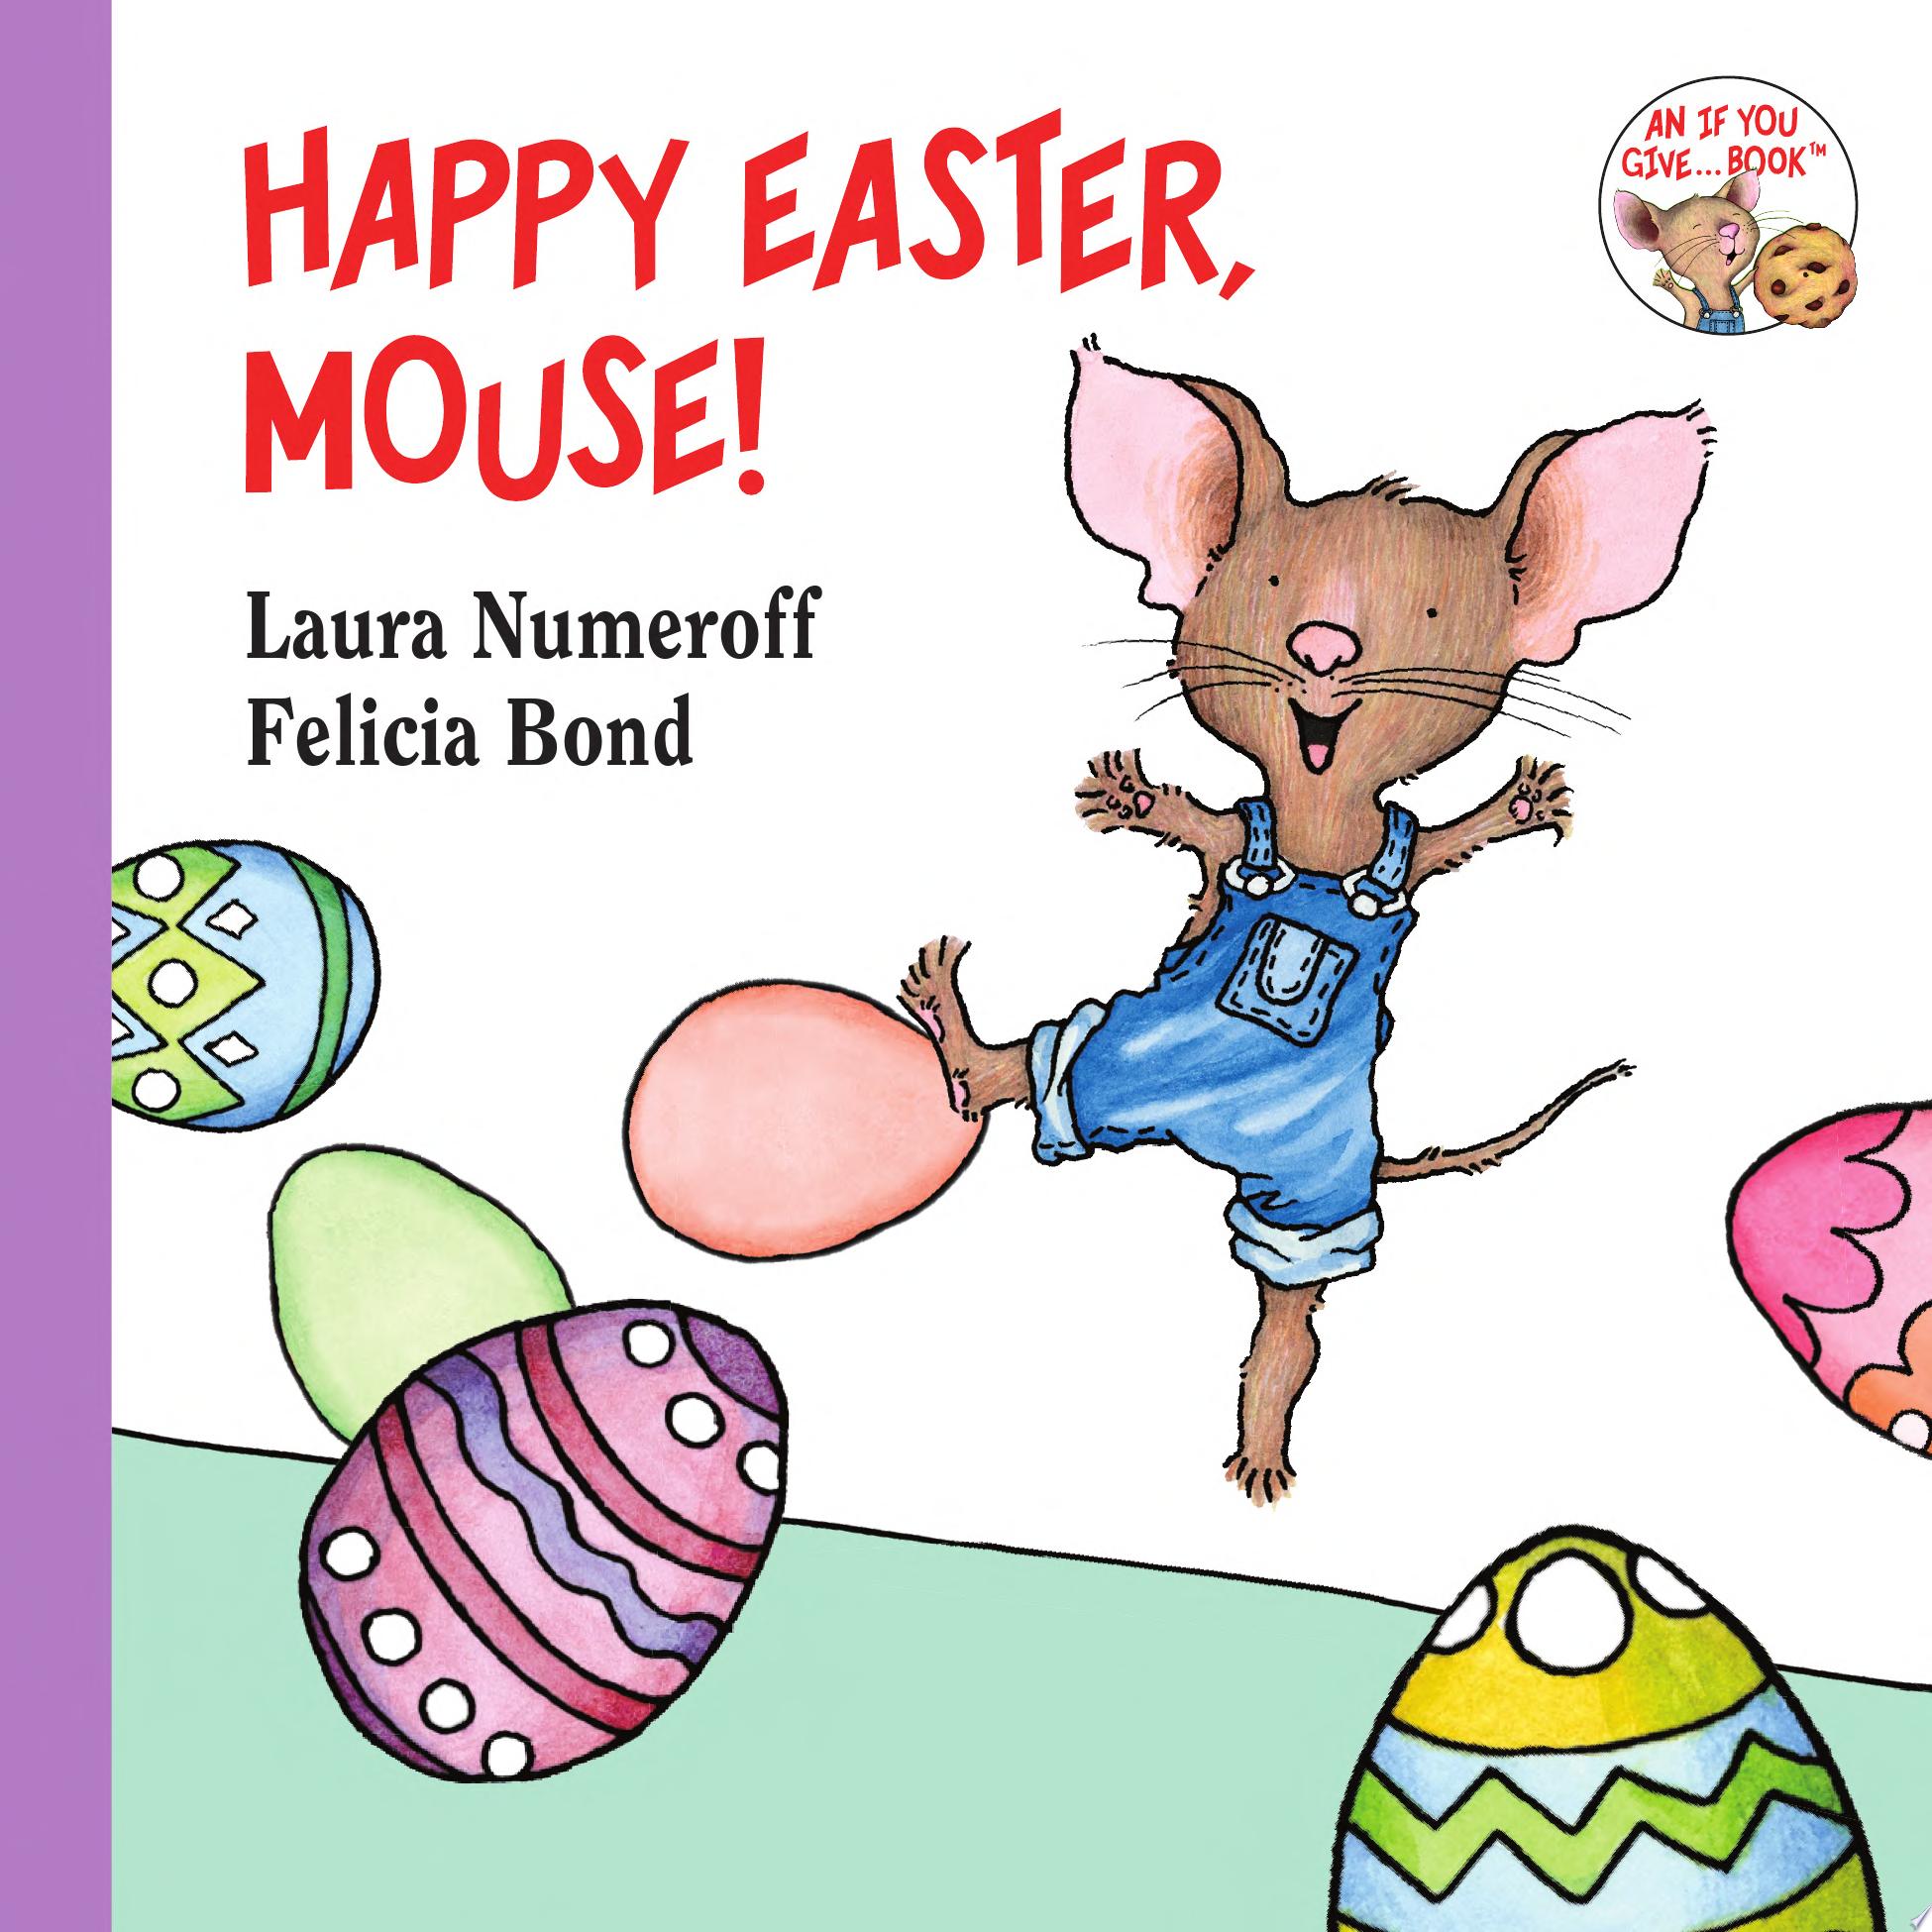 Image for "Happy Easter, Mouse!"